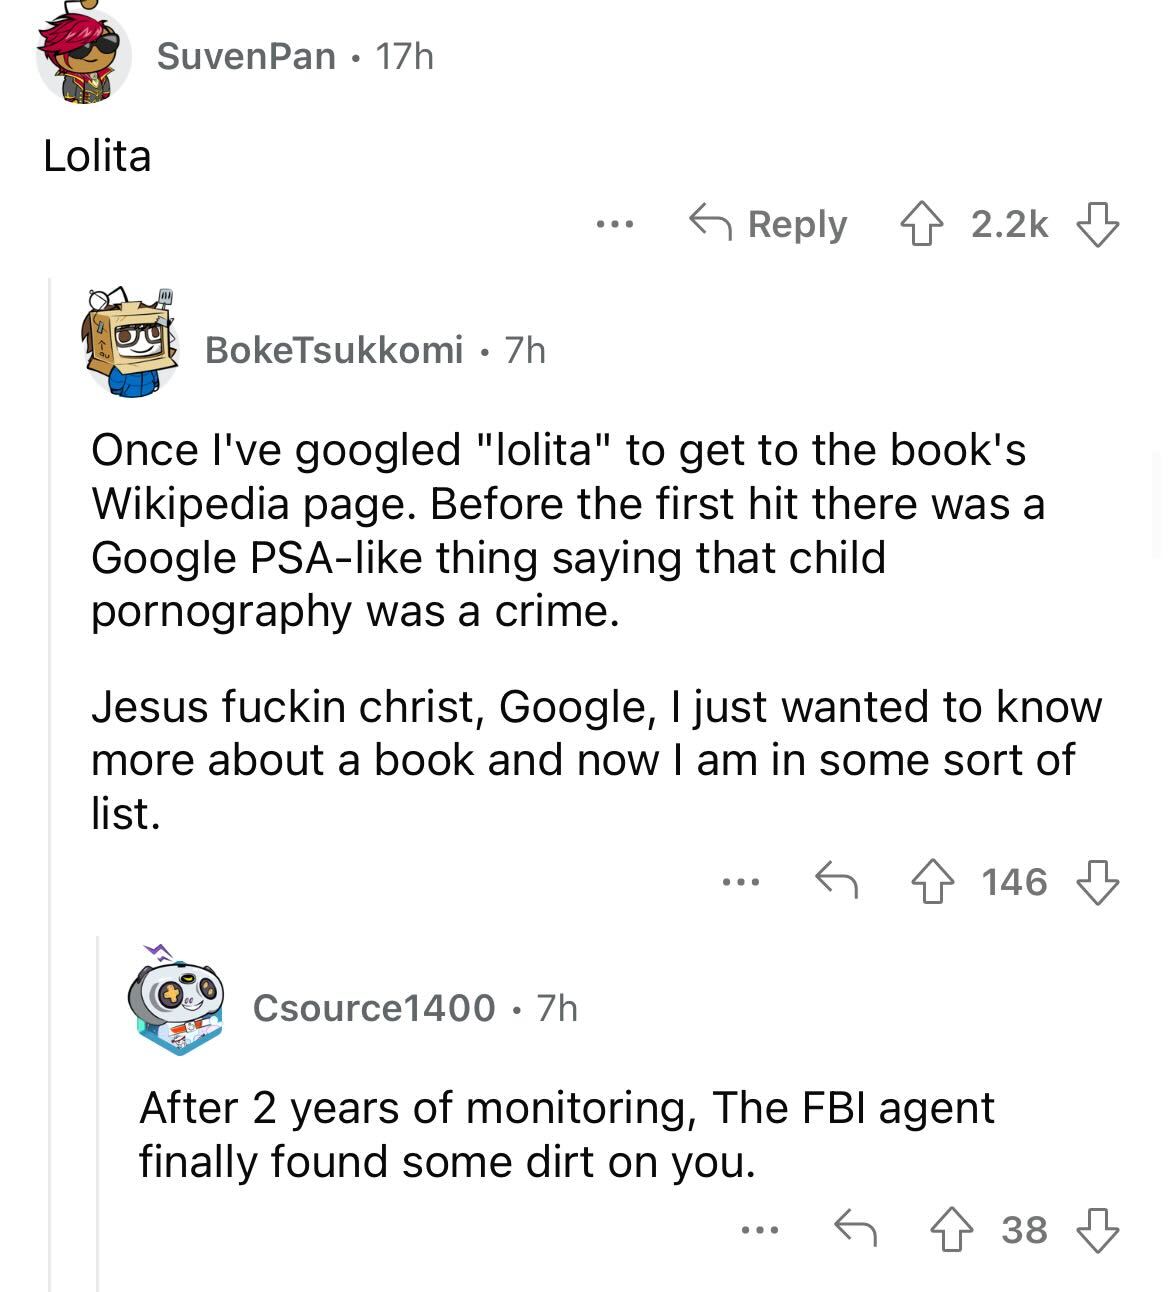 names that were ruined because of someone - angle - Lolita SuvenPan 17h BokeTsukkomi . 7h ... Once I've googled "lolita" to get to the book's Wikipedia page. Before the first hit there was a Google Psa thing saying that child pornography was a crime. Csou